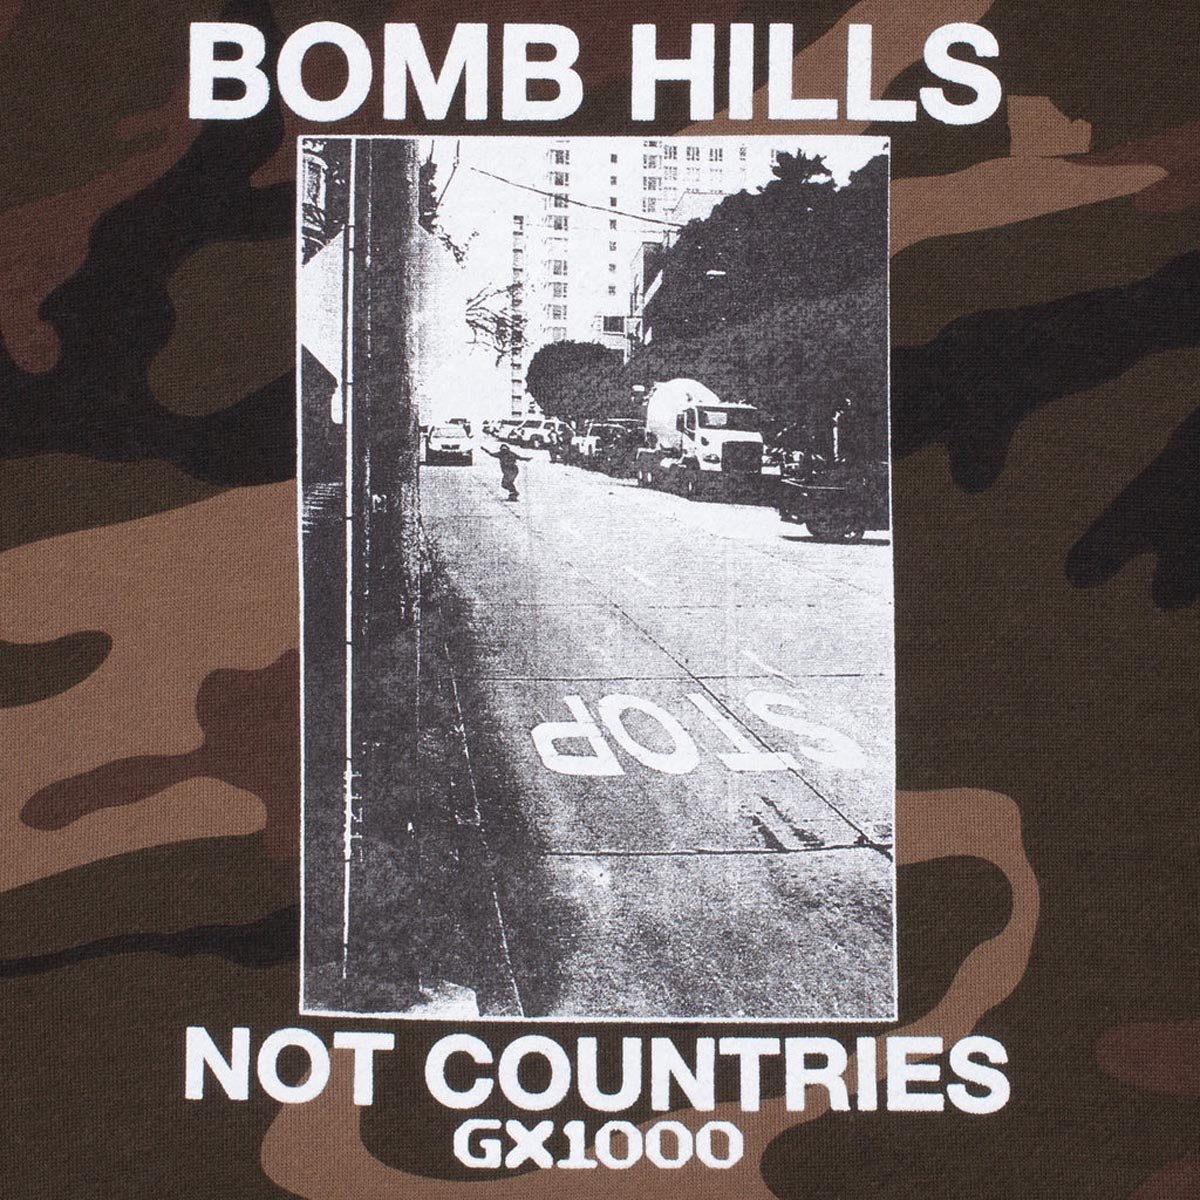 GX1000 Bomb Hills Not Countries Hoodie - Camo image 2